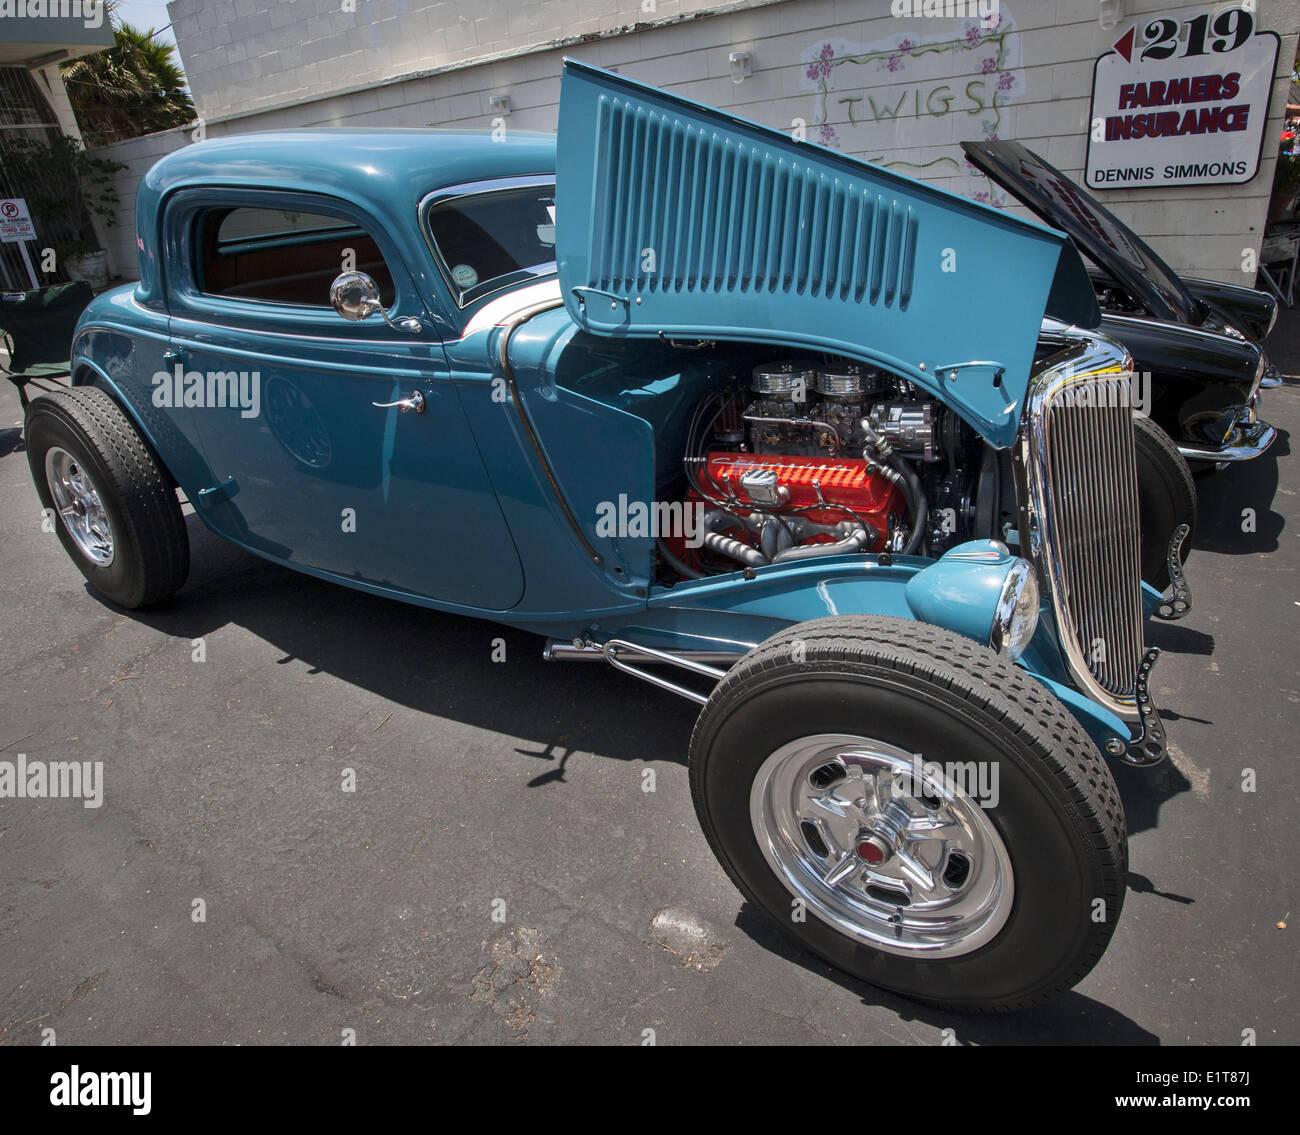 San Clemente, California, USA. 8th June, 2014. A classic light blue Ford Roadster Hot rod with mag wheels. The 19th Annual 2014 San Clemente Car Show featuring new and old classic and exotic cars and trucks took over the downtown along Avenida Del Mar on Sunday, June 8, 2014. The one day event brings car collectors and enthusiasts from all over southern California. Credit:  David Bro/ZUMAPRESS.com/Alamy Live News Stock Photo